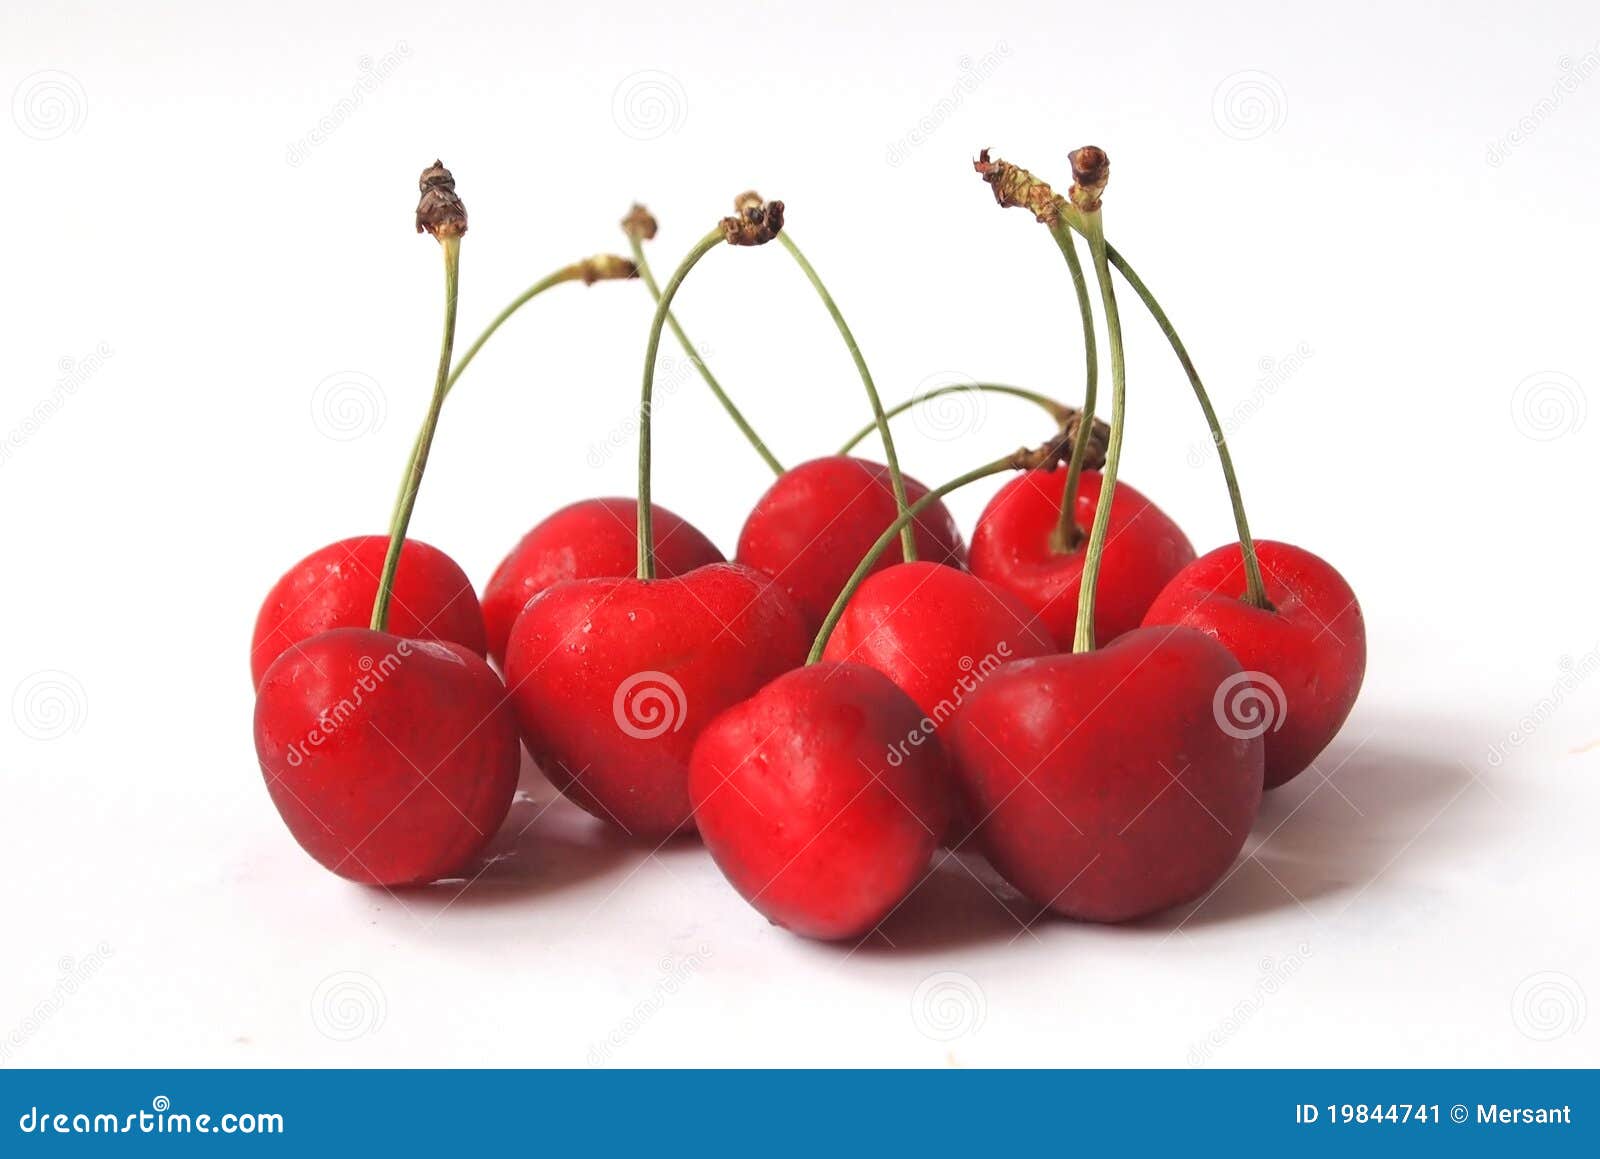 Cherry stock image. Image of fruit, eating, nature, agriculture - 19844741